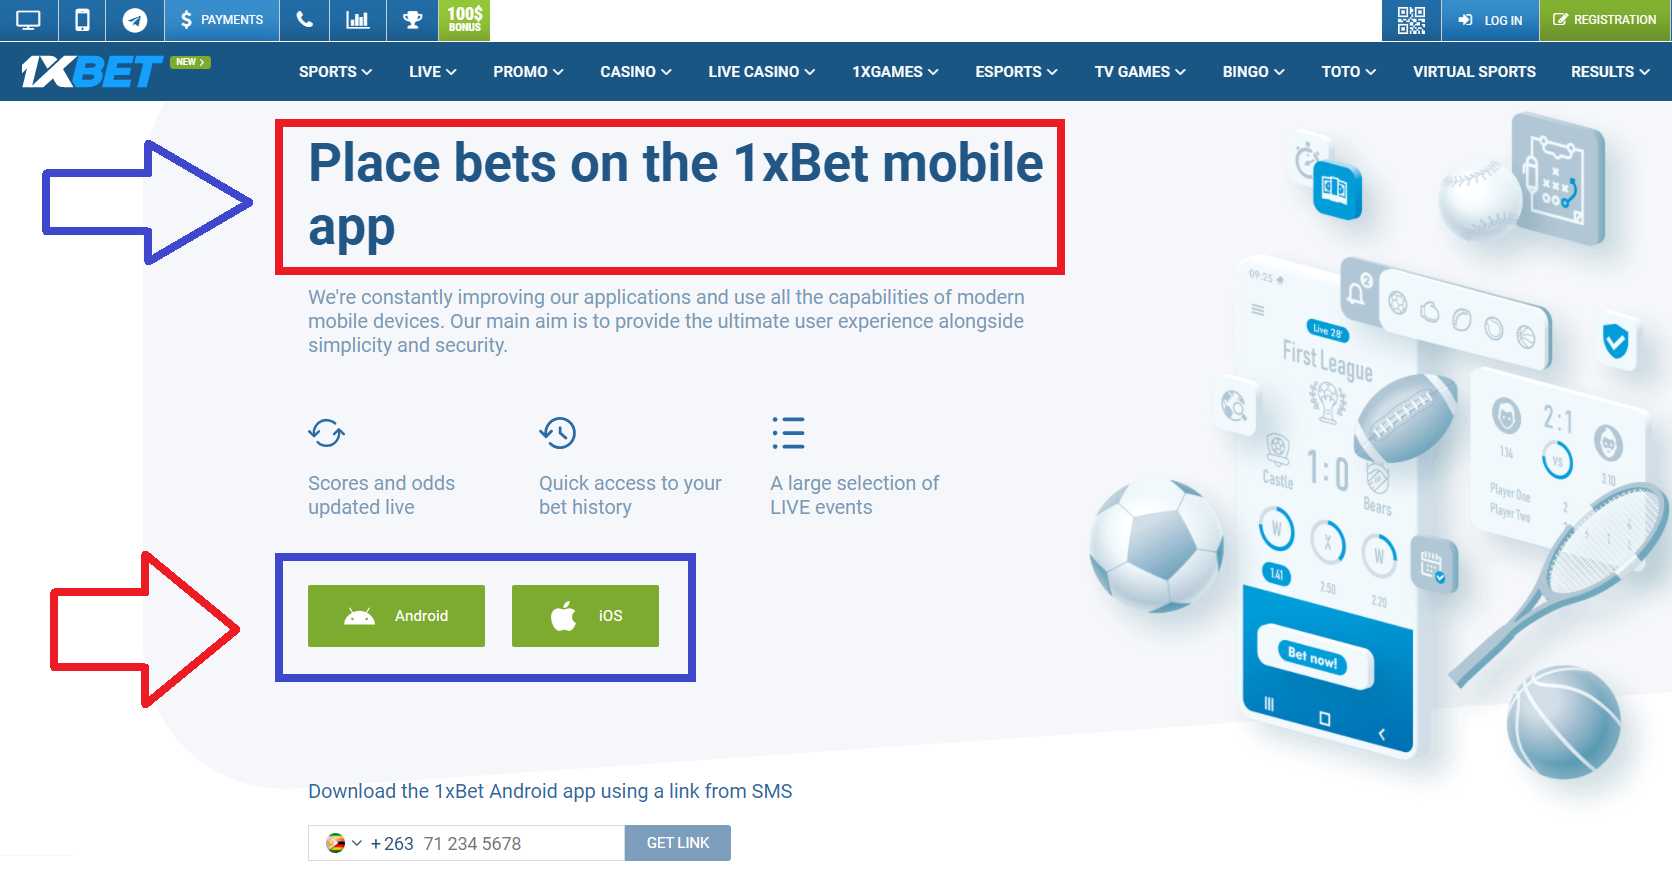 Advantages of 1xBet’s program for Android